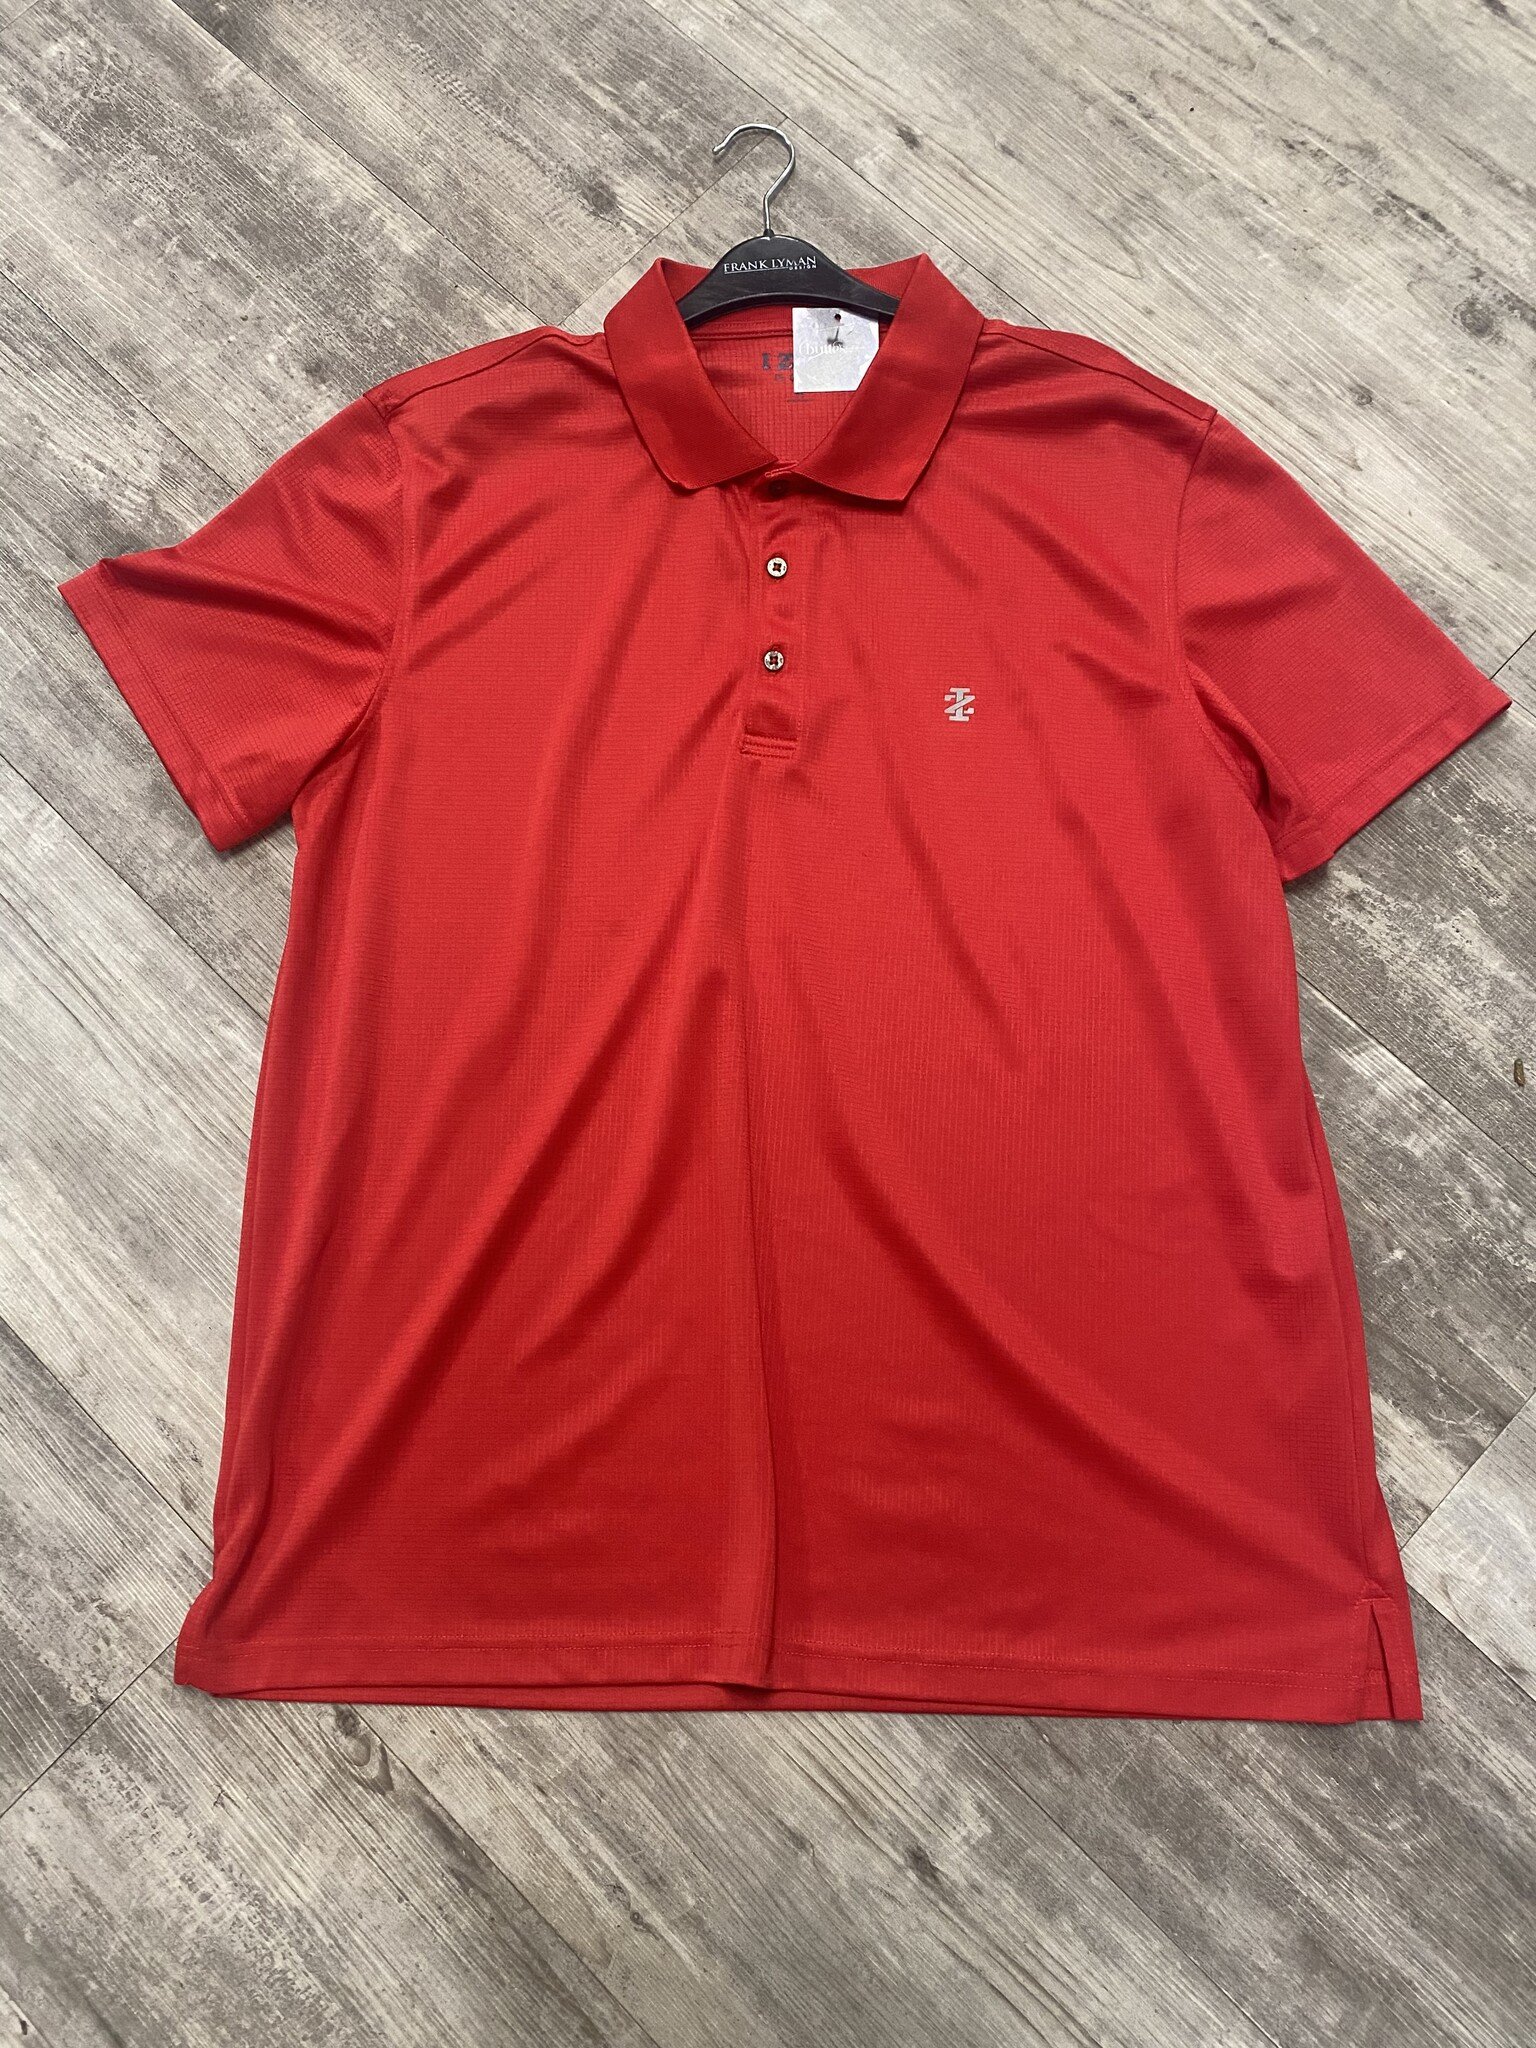 Red Polo Size XL